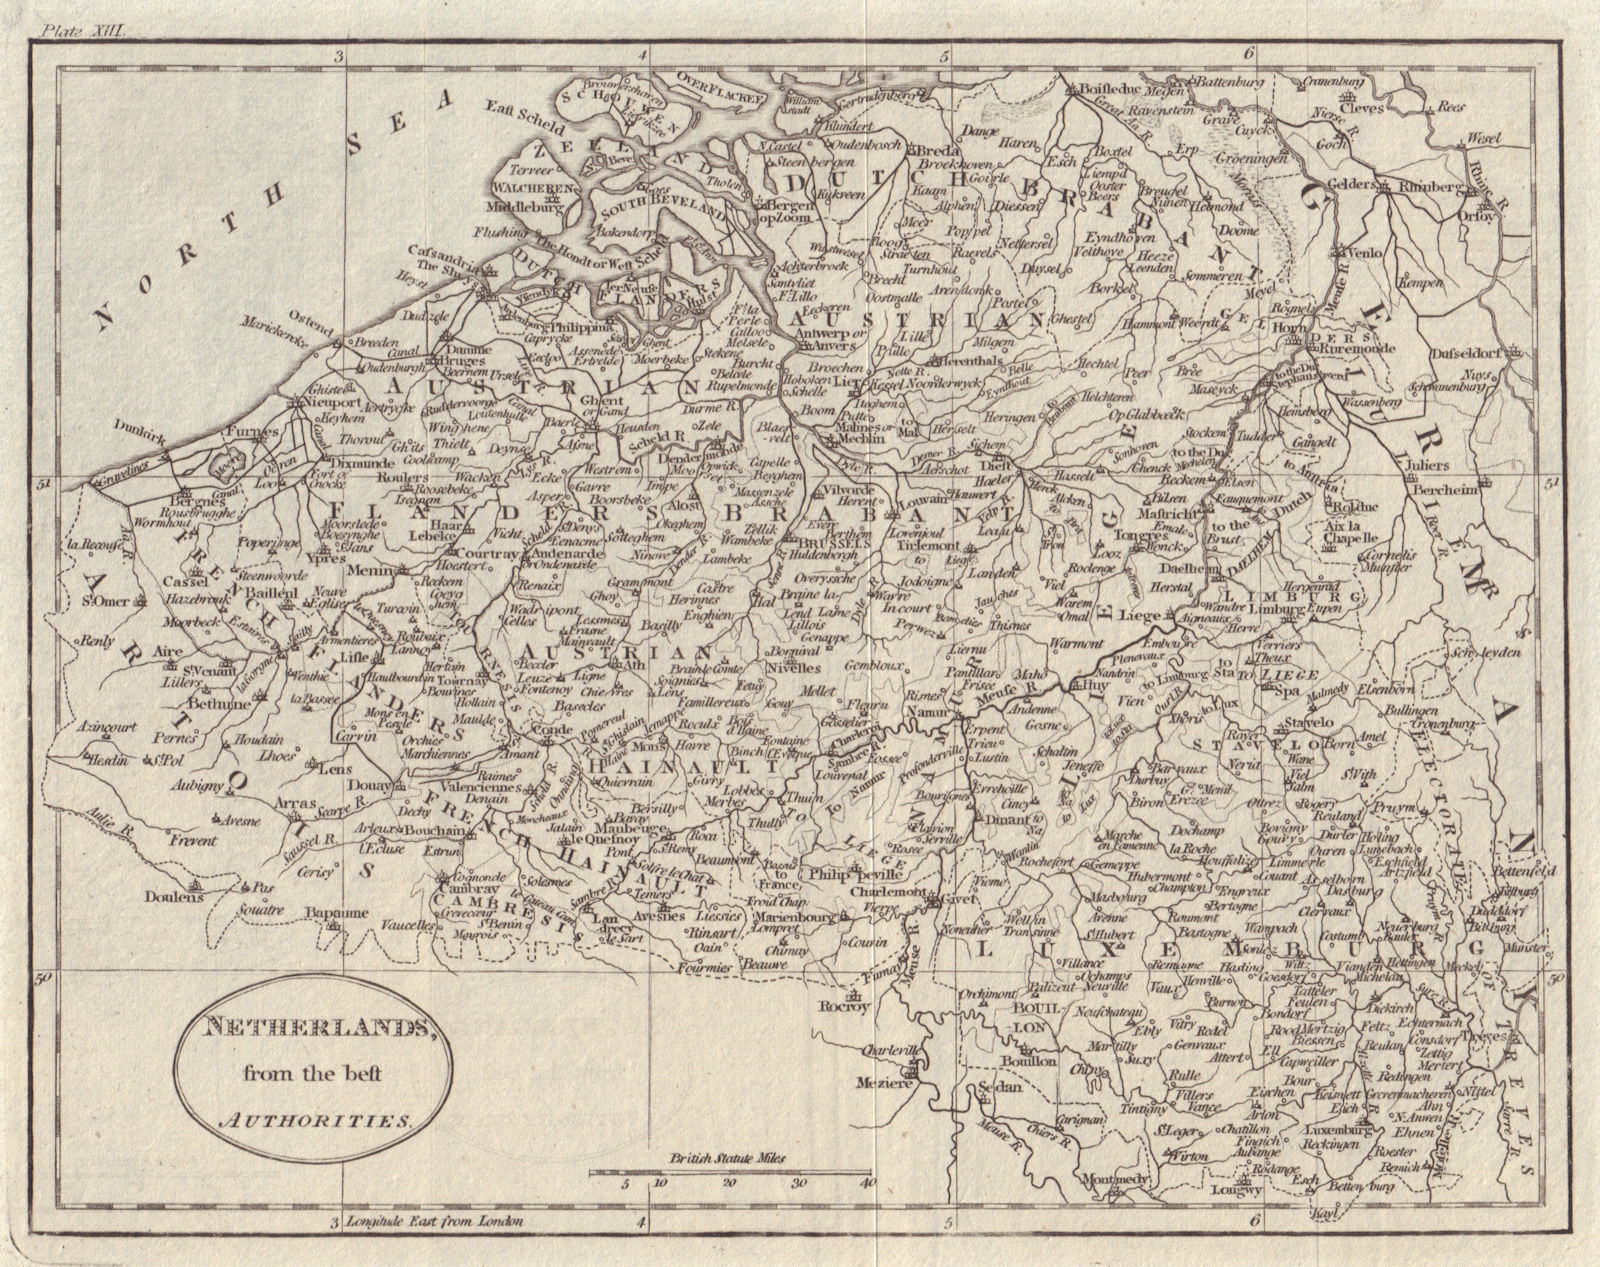 Belgium & Luxembourg. "Netherlands from the best authorities". GUTHRIE 1801 map